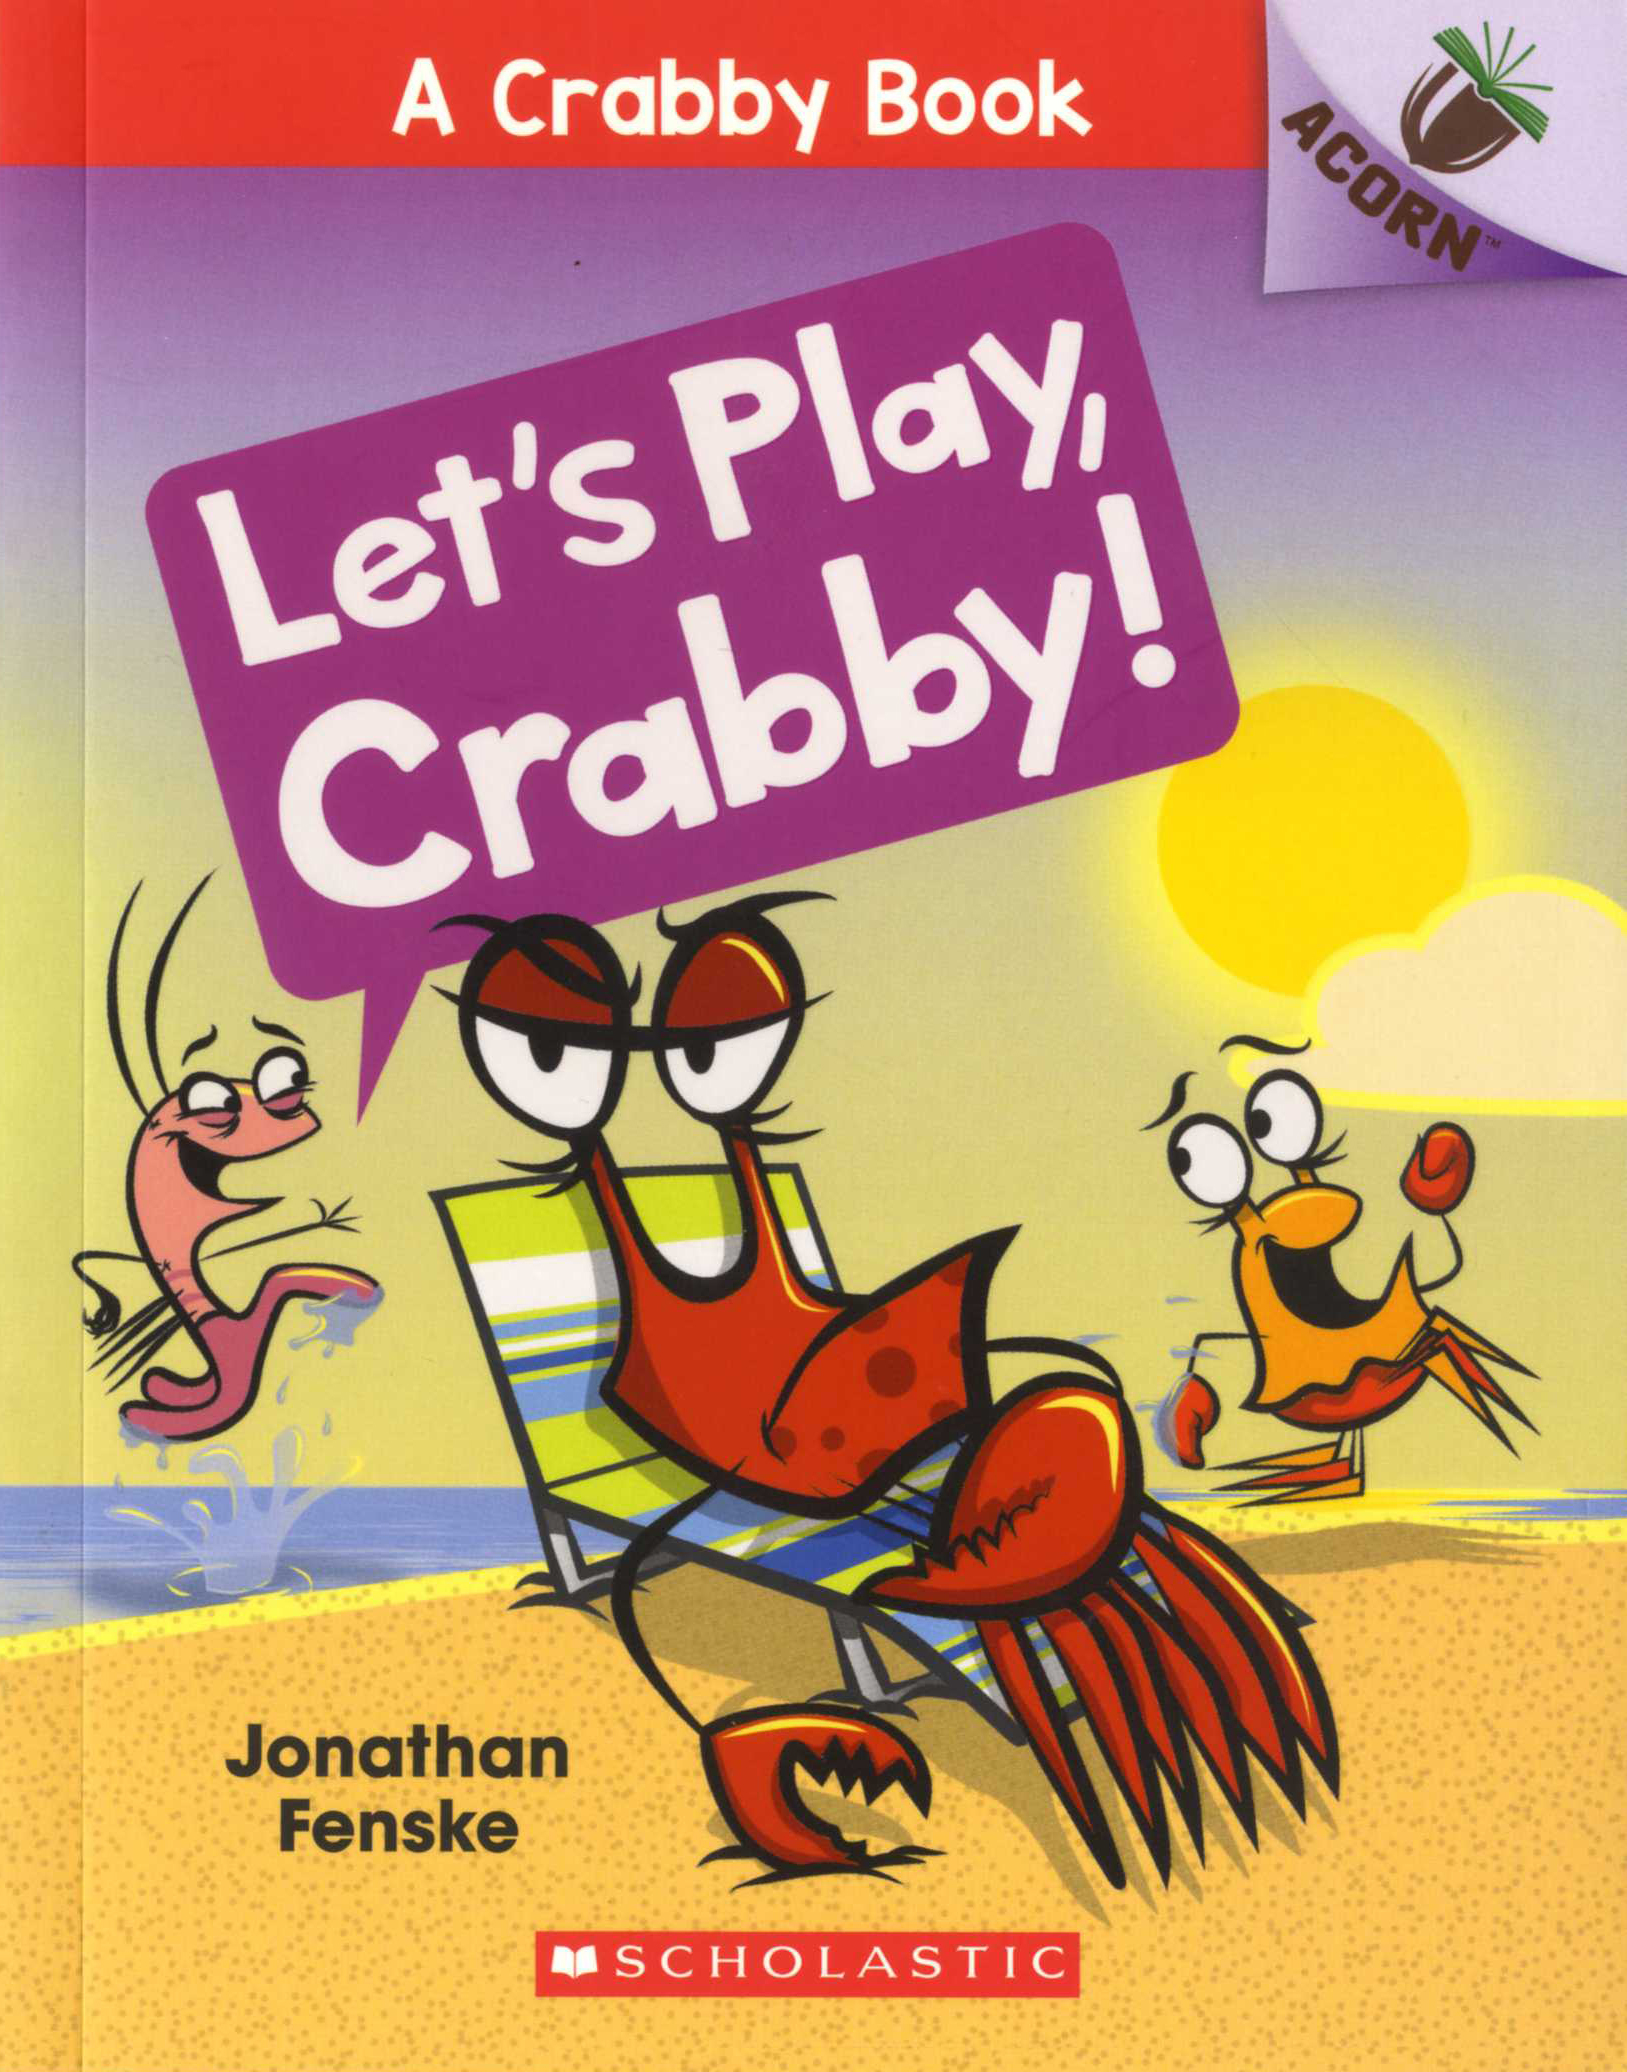 A Crabby Book #2: Let's Play, Crabby!